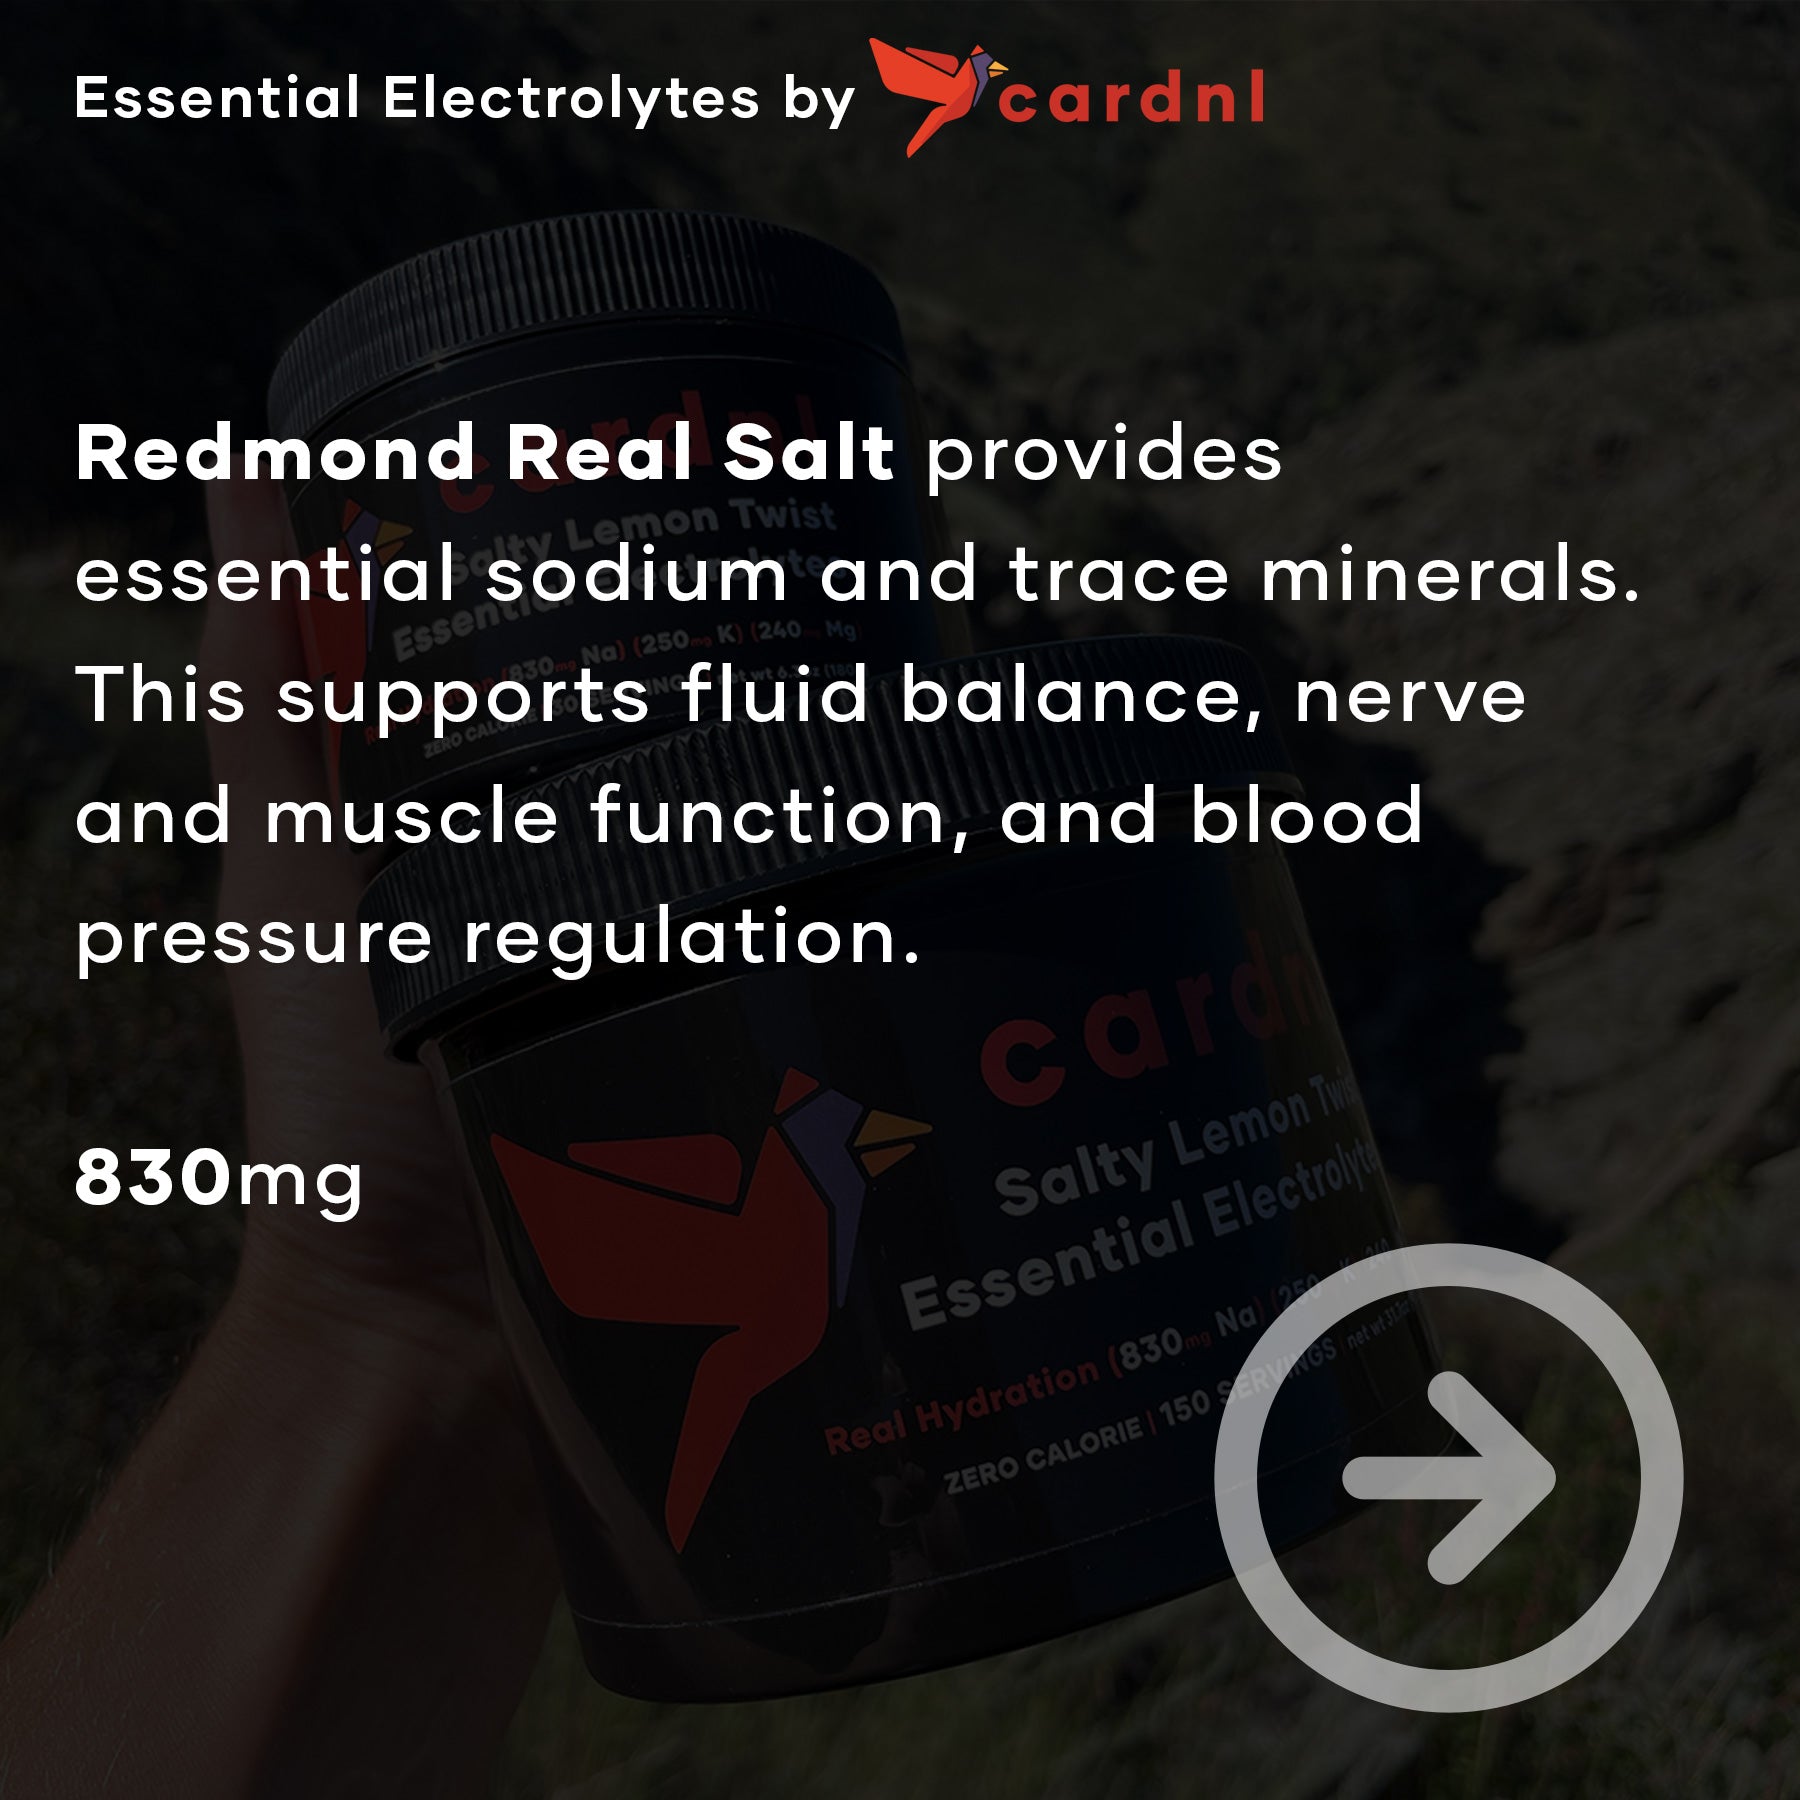 Redmond Real salt provides essential sodium and trace minerals. This supports fluid balance, nerve and muscle function, and blood pressure regulation.